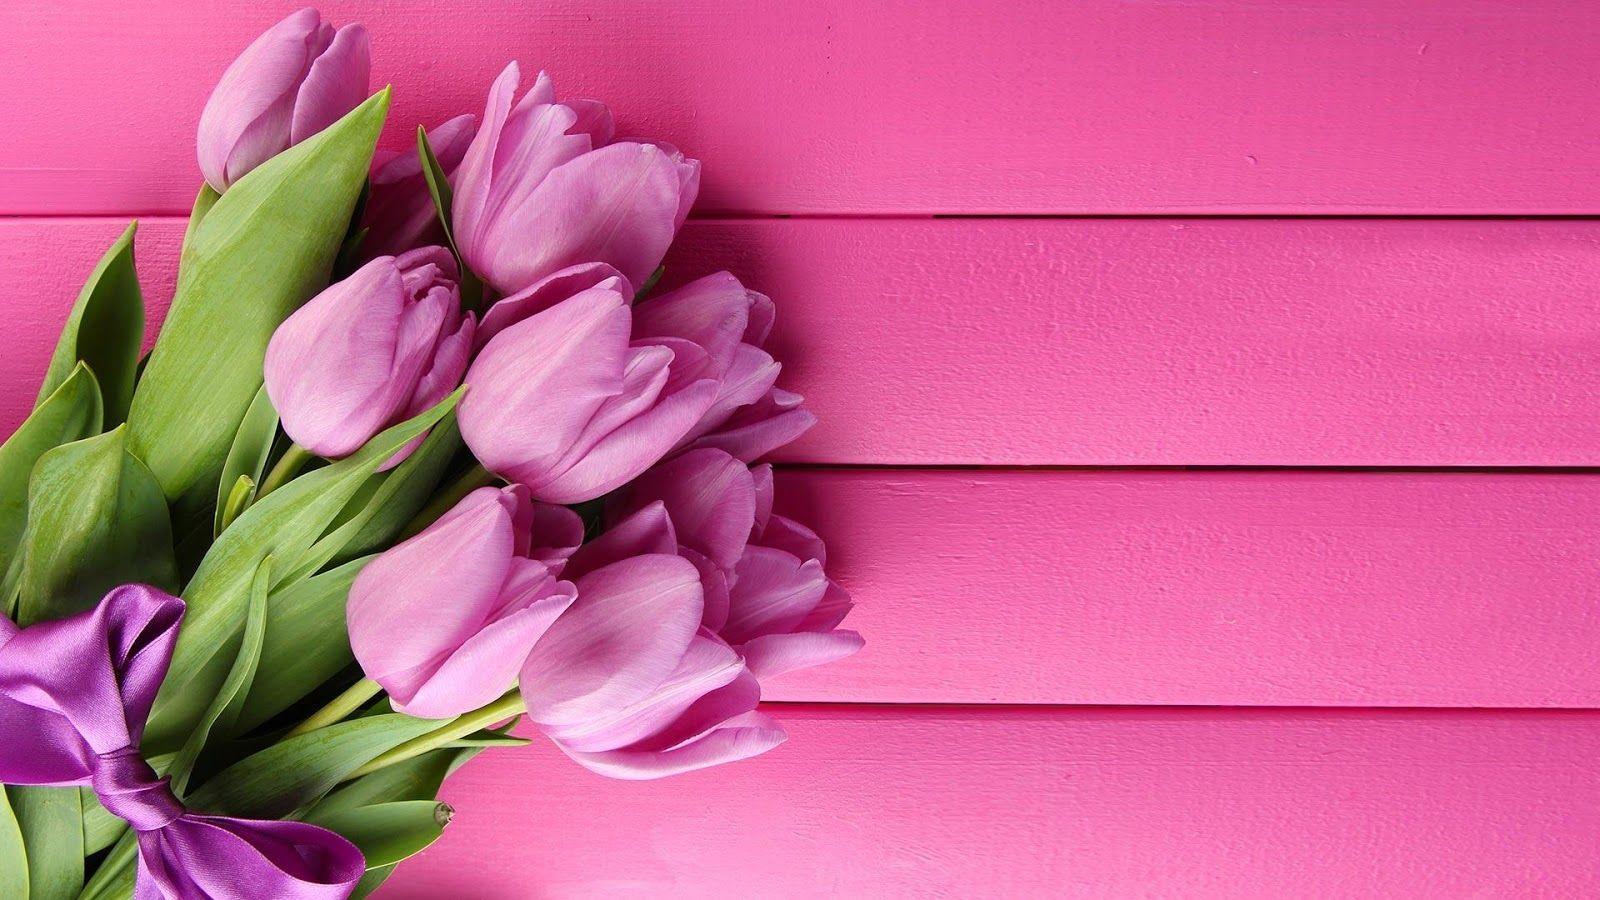 Pink Tulips Live Wallpaper Apps on Google Play